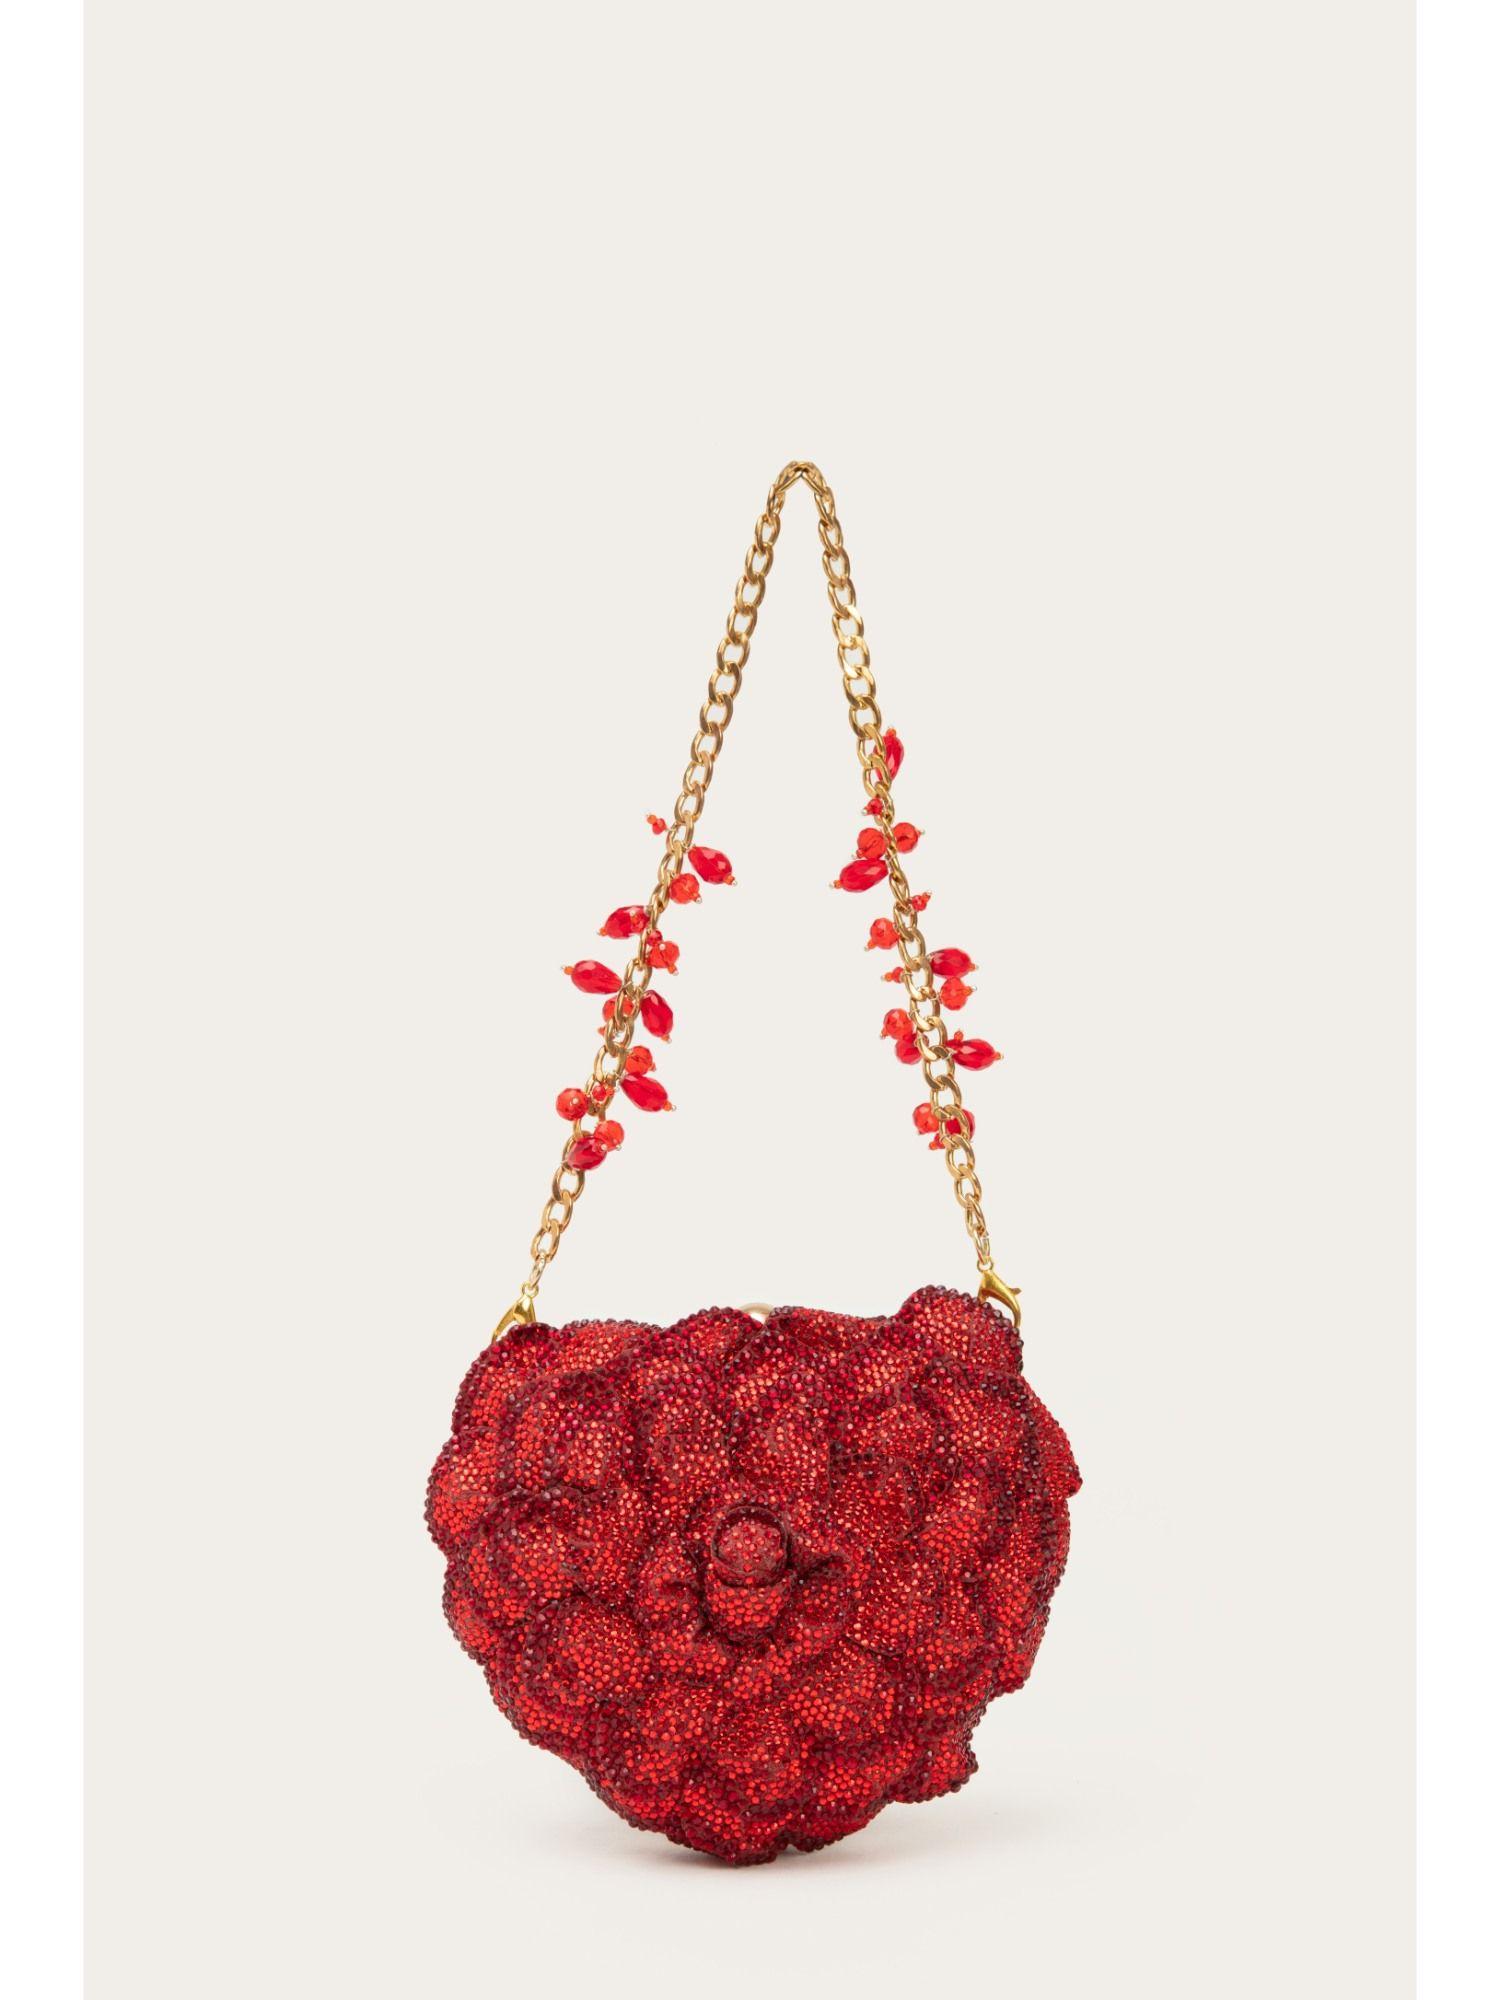 isa crysta red embellished clutch